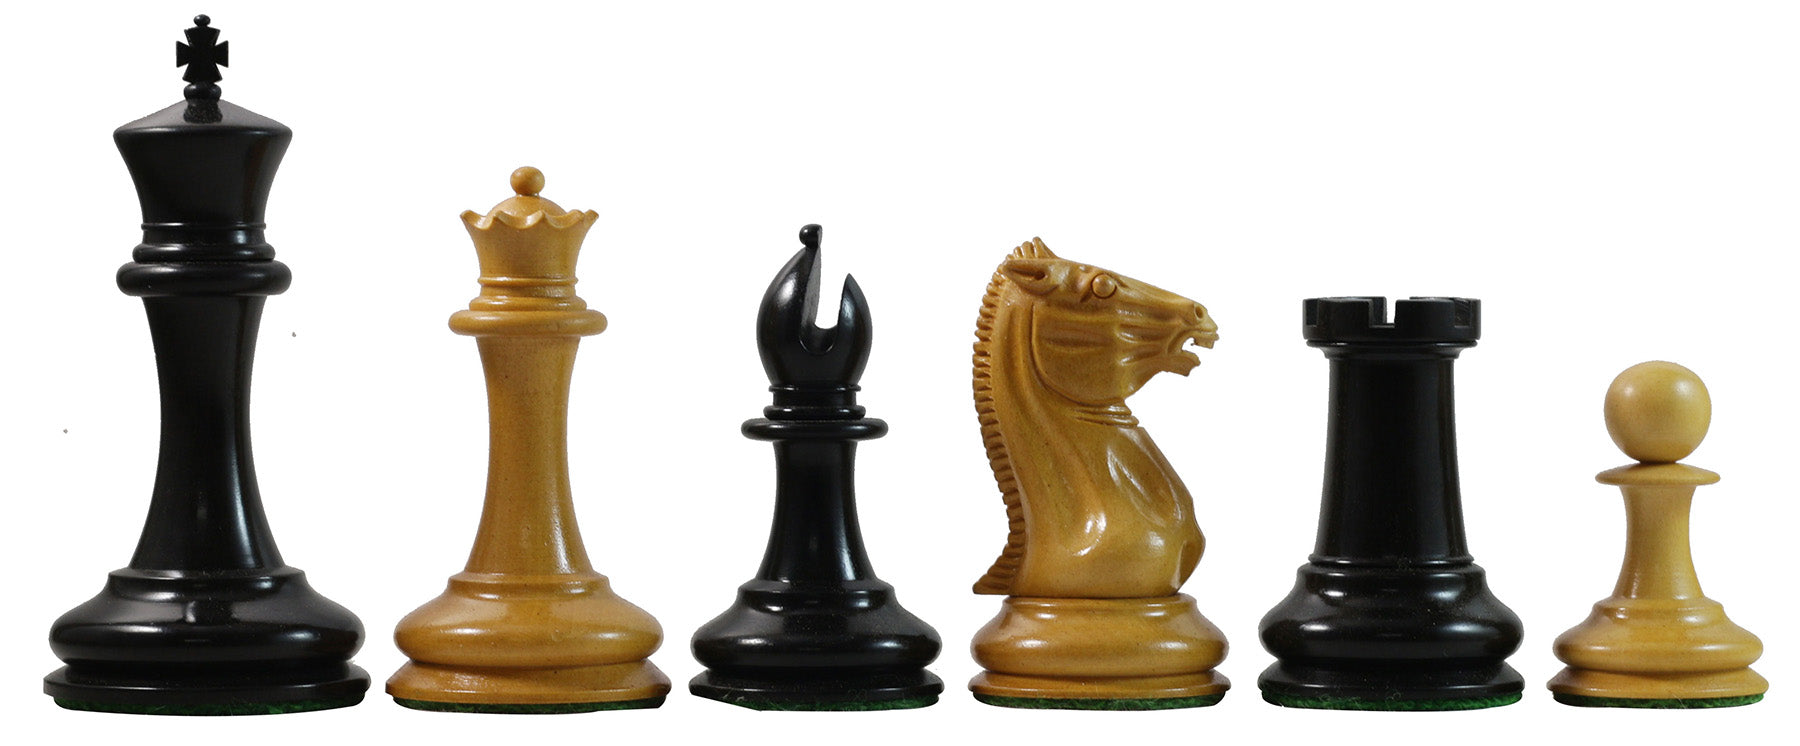 Morphy Cooke 1849-50 Vintage 3.5" Reproduction Chess Set in Antiqued Boxwood